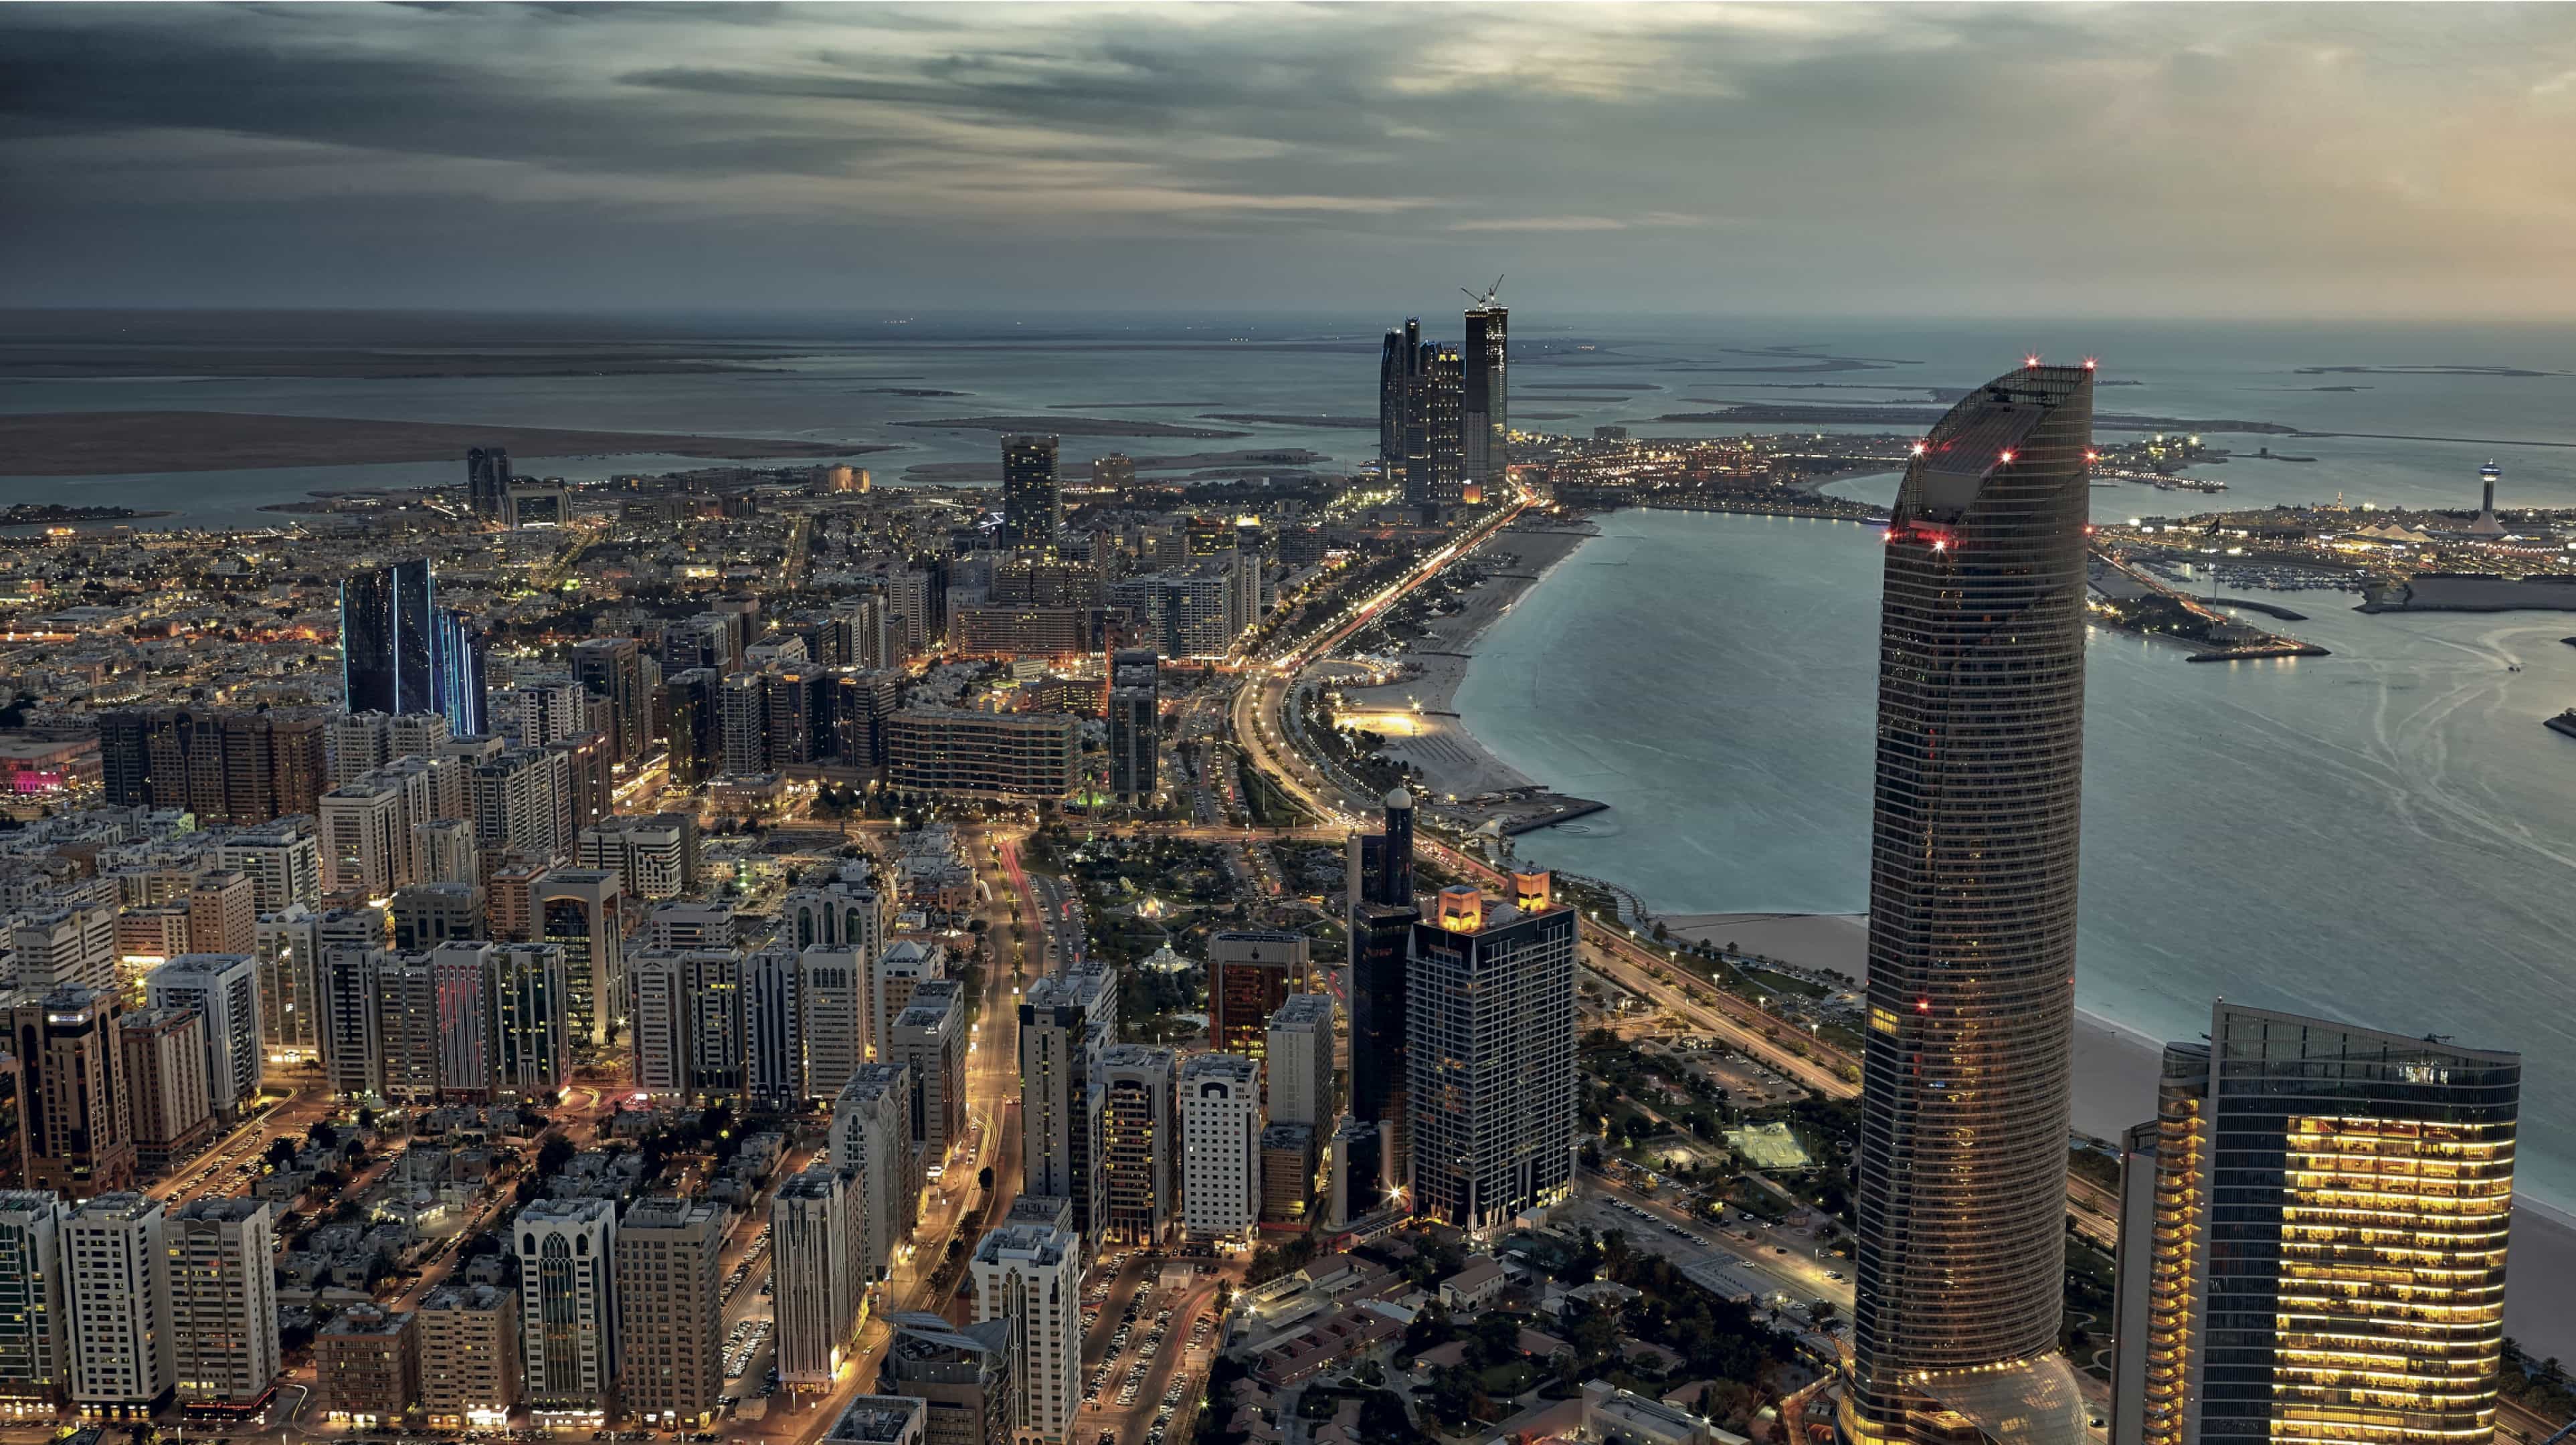 Abu Dhabi skyline at dusk, a perfect place to start a business